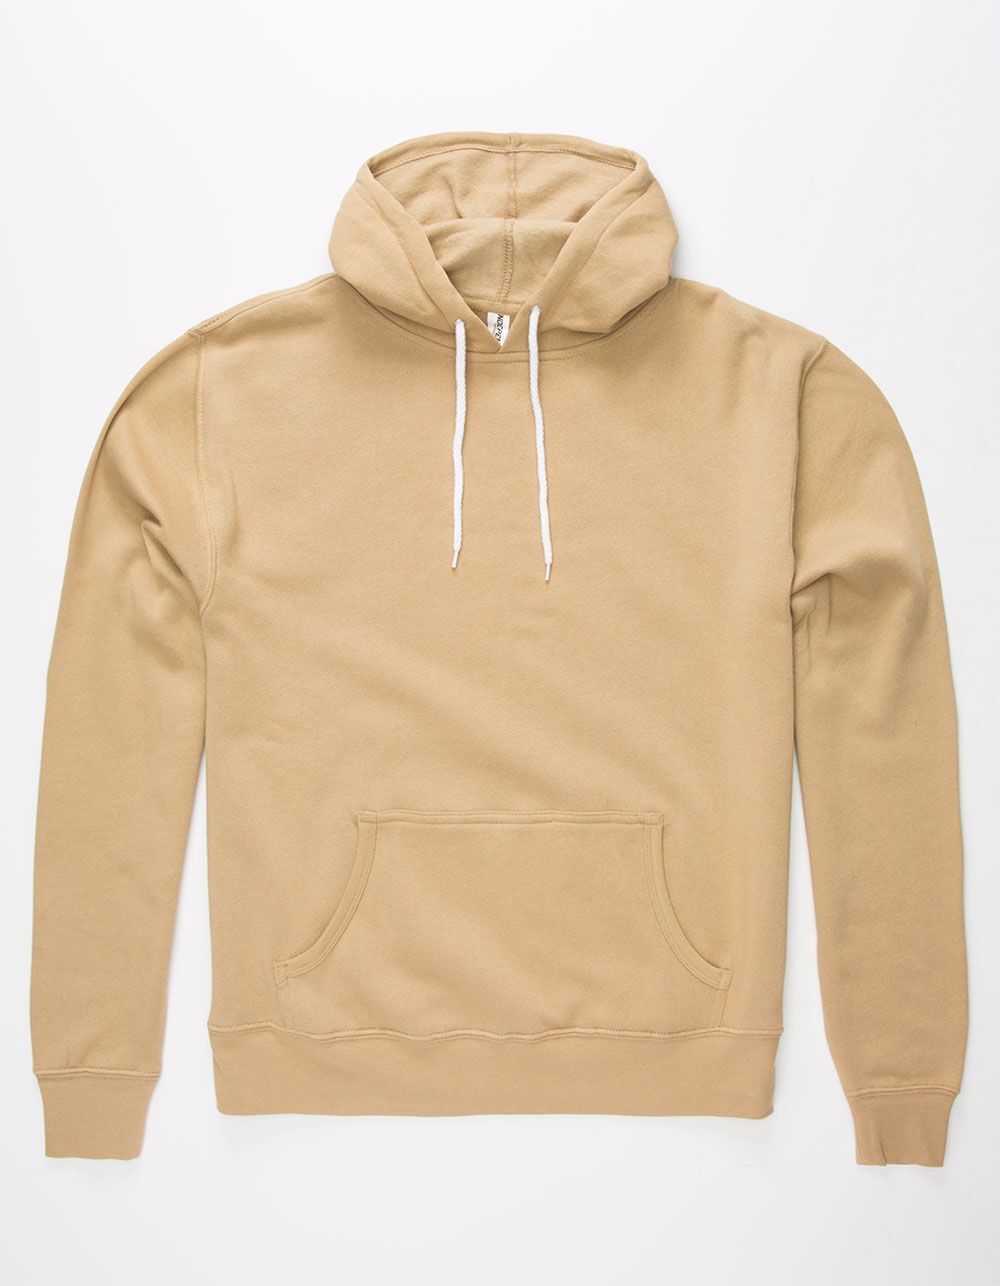 INDEPENDENT TRADING COMPANY KHAKI HOODIE | Tillys